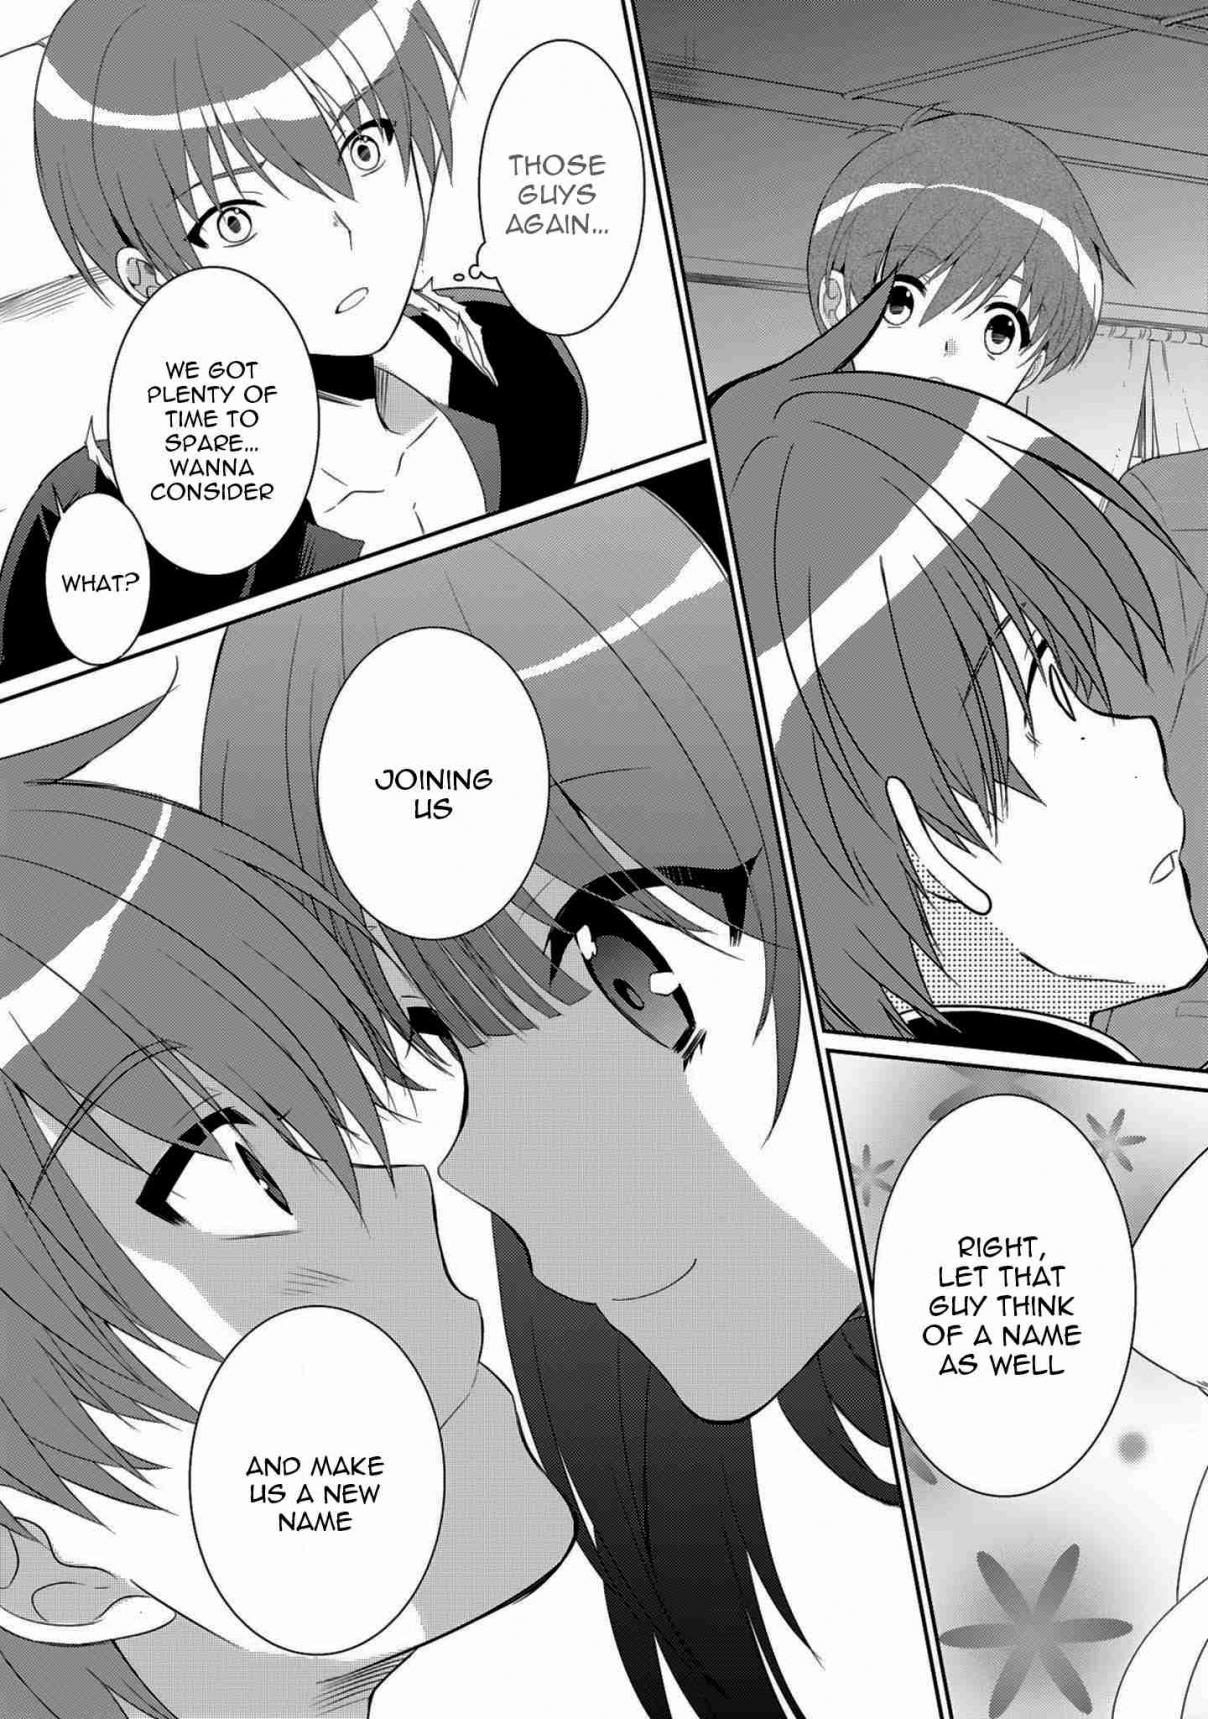 Angel Beats! The Last Operation Vol. 1 Ch. 1.1 Part Two (Revised)